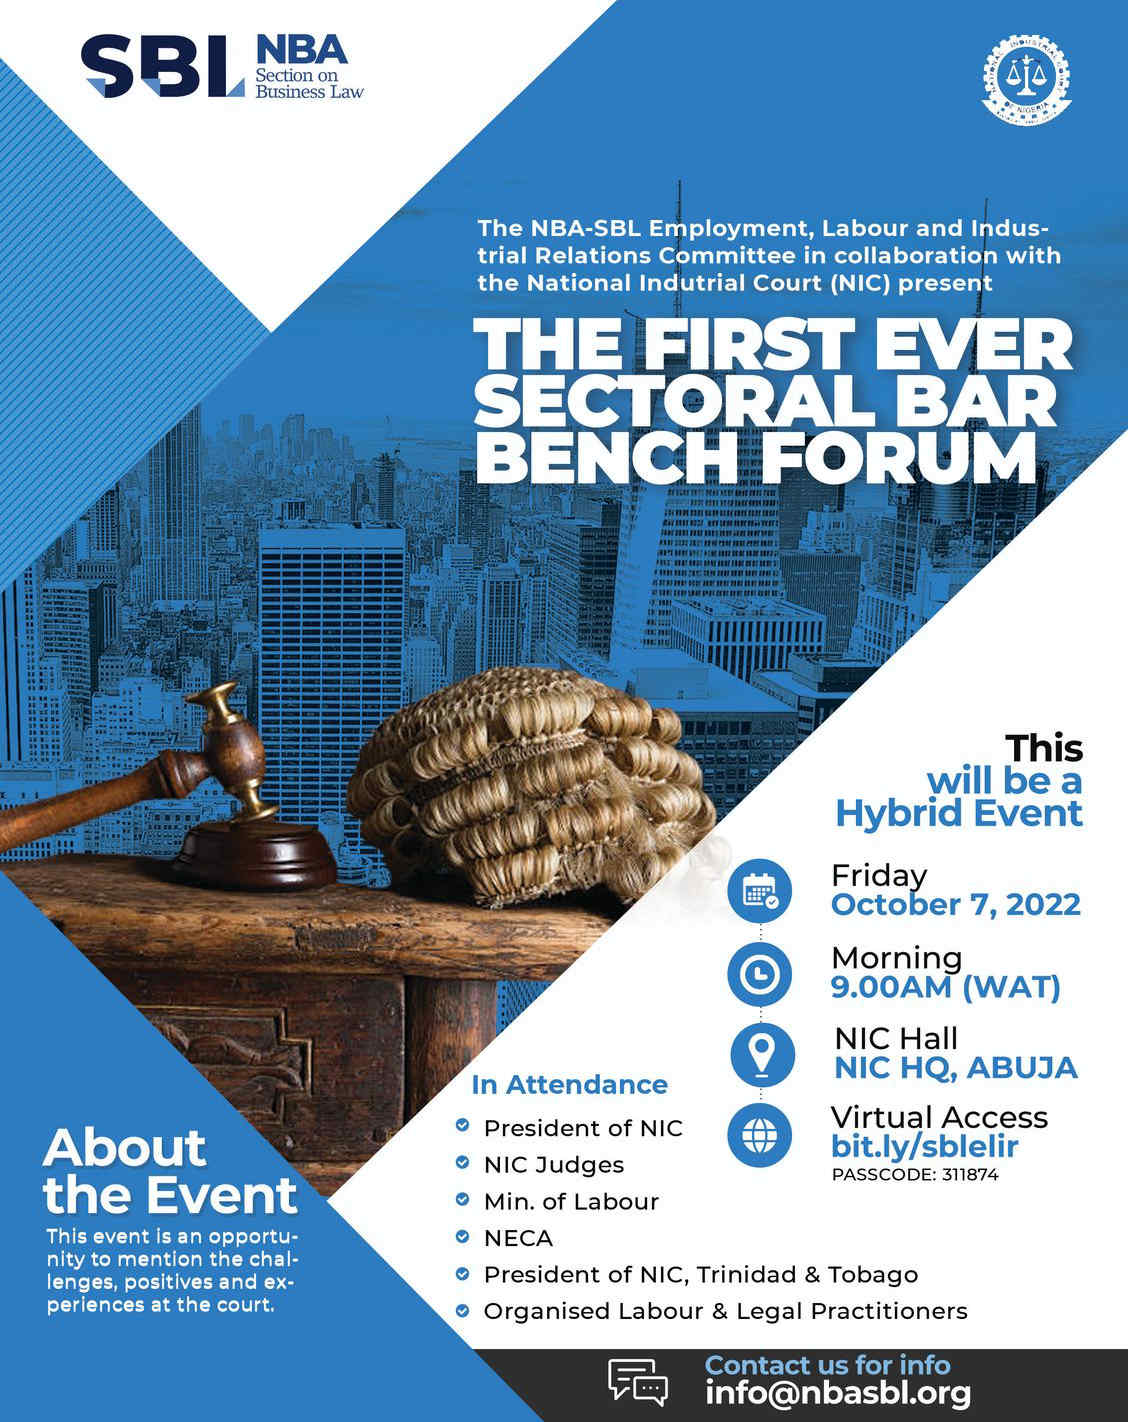 NBA-SBL TO HOLD FIRST EVER SECTORAL BAR-BENCH FORUM ON LABOUR ISSUES